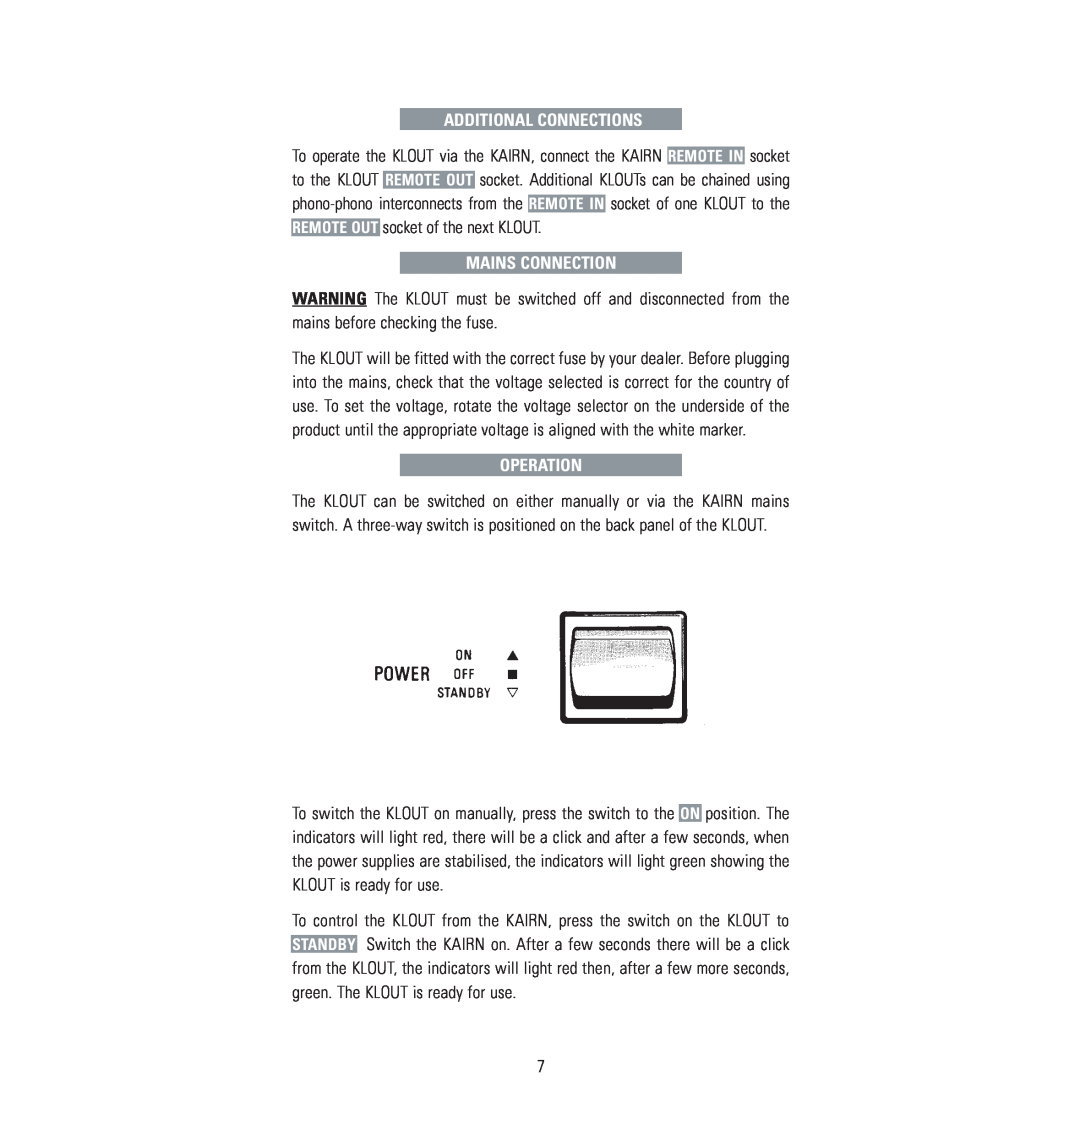 Linn Klout owner manual Additional Connections, Mains Connection, Operation 